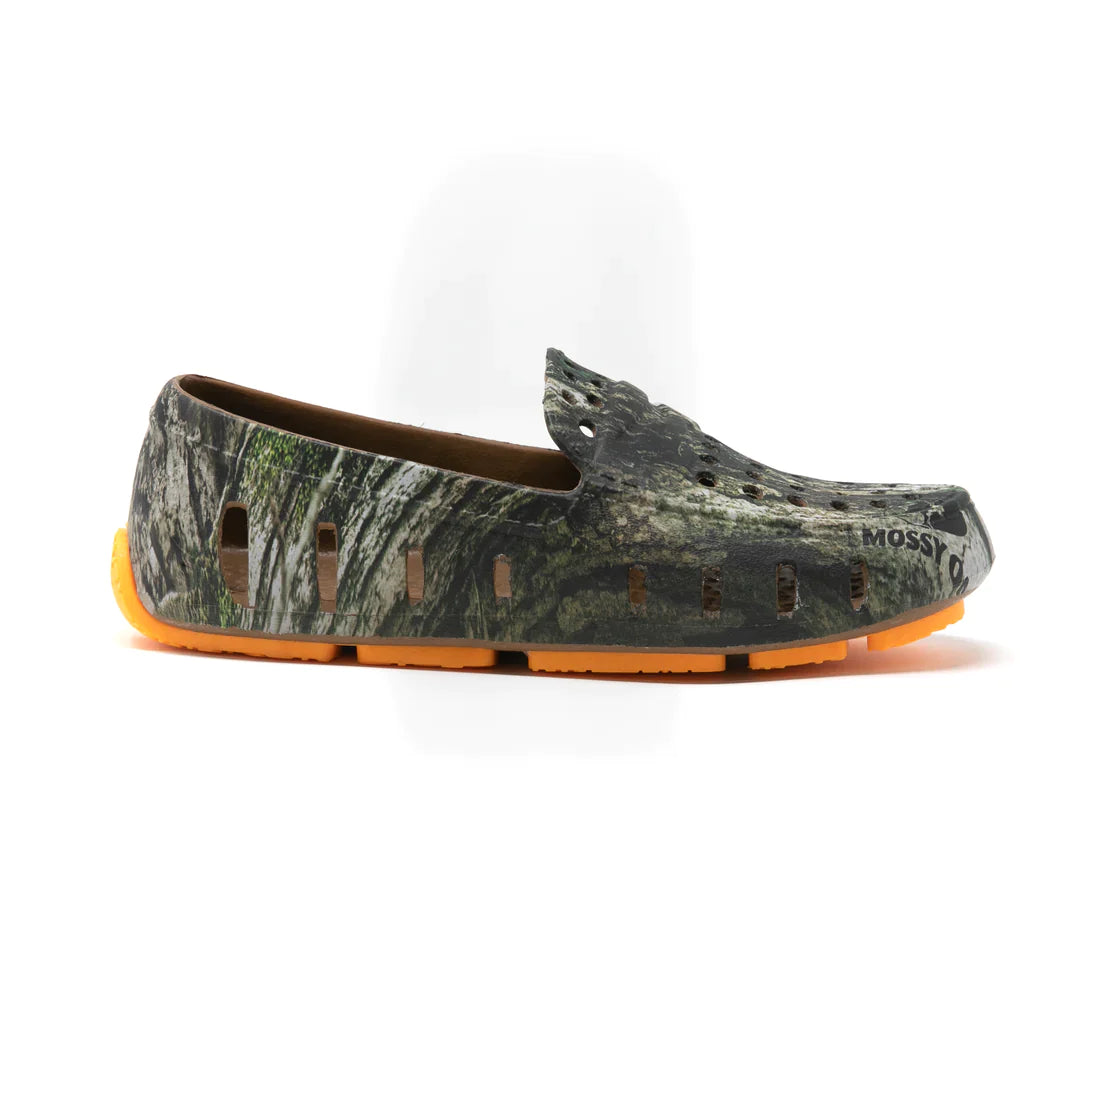 Floafers Prodigy Driver  - Mossy Oak Camo